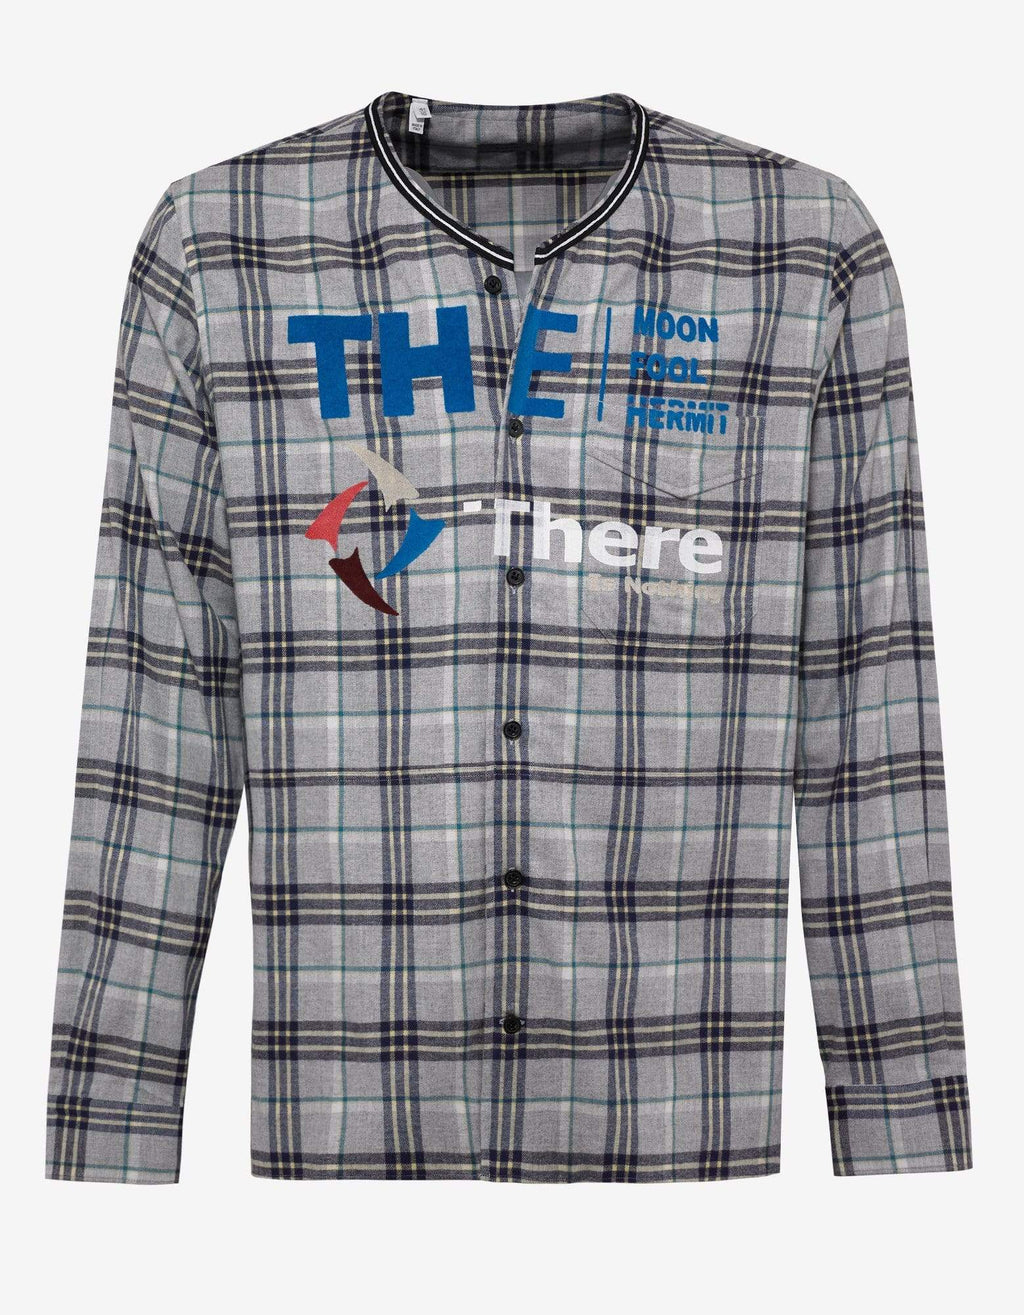 Lanvin Lanvin Grey Check 'There is Nothing' Print Shirt